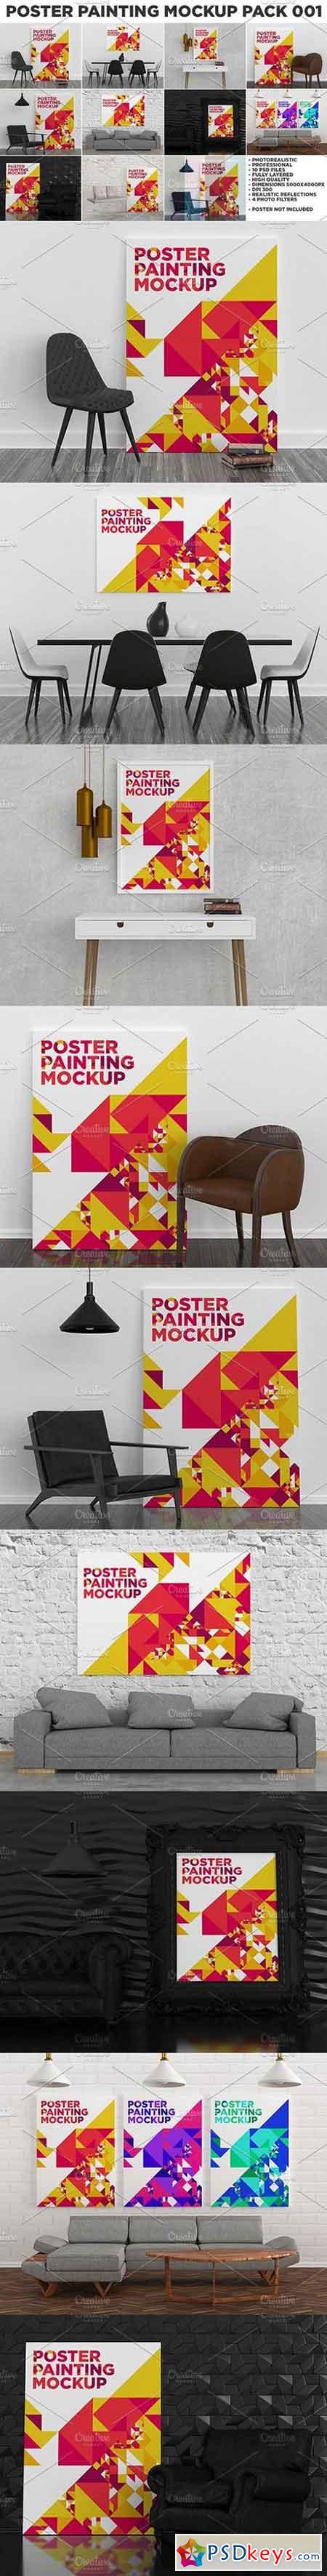 Poster Painting MockUp Pack 001 1710761